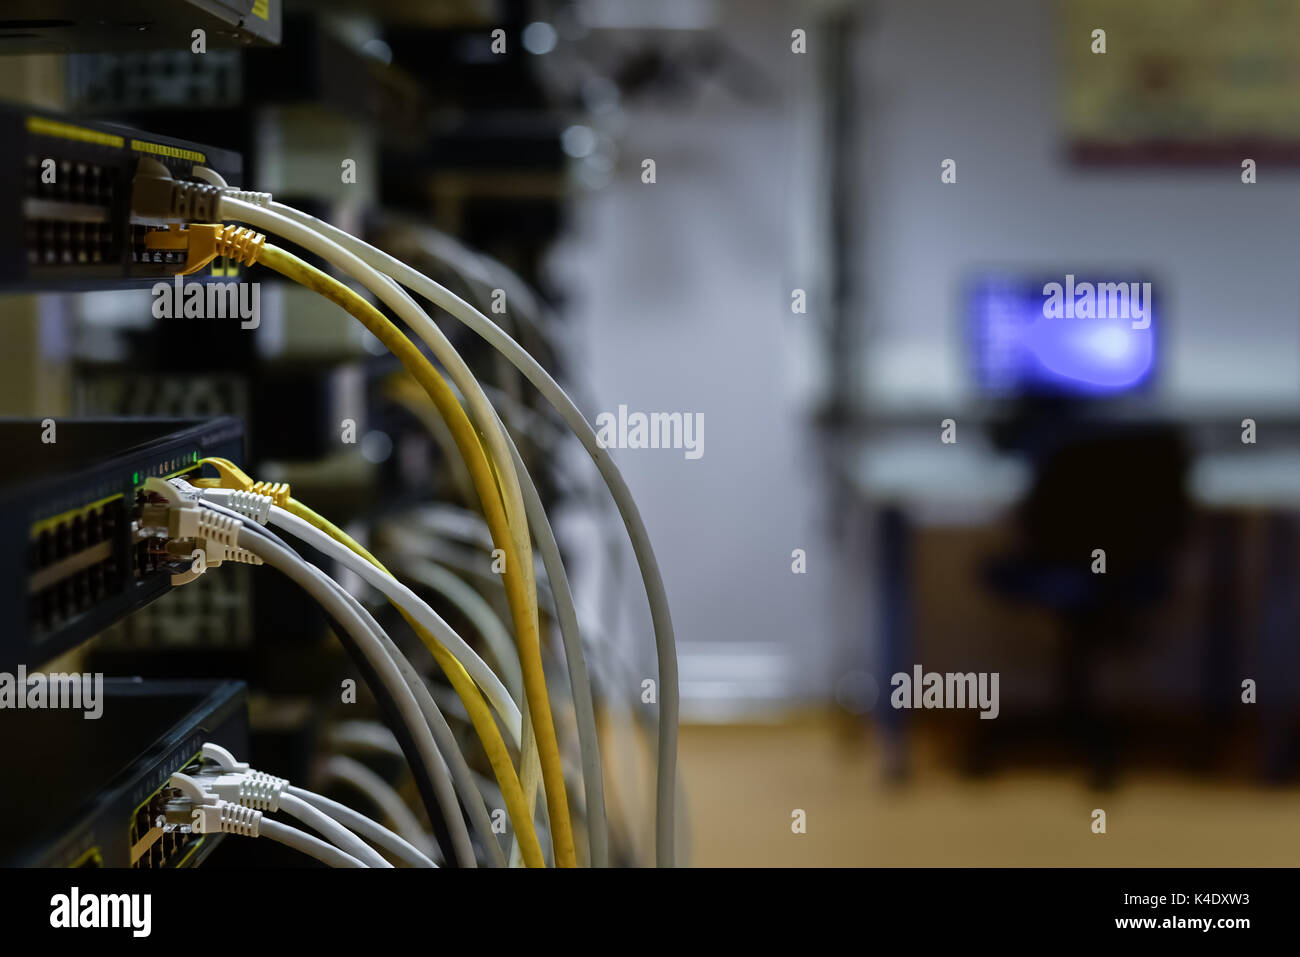 RJ45 cables plugged into switches in rack with work space on background Stock Photo